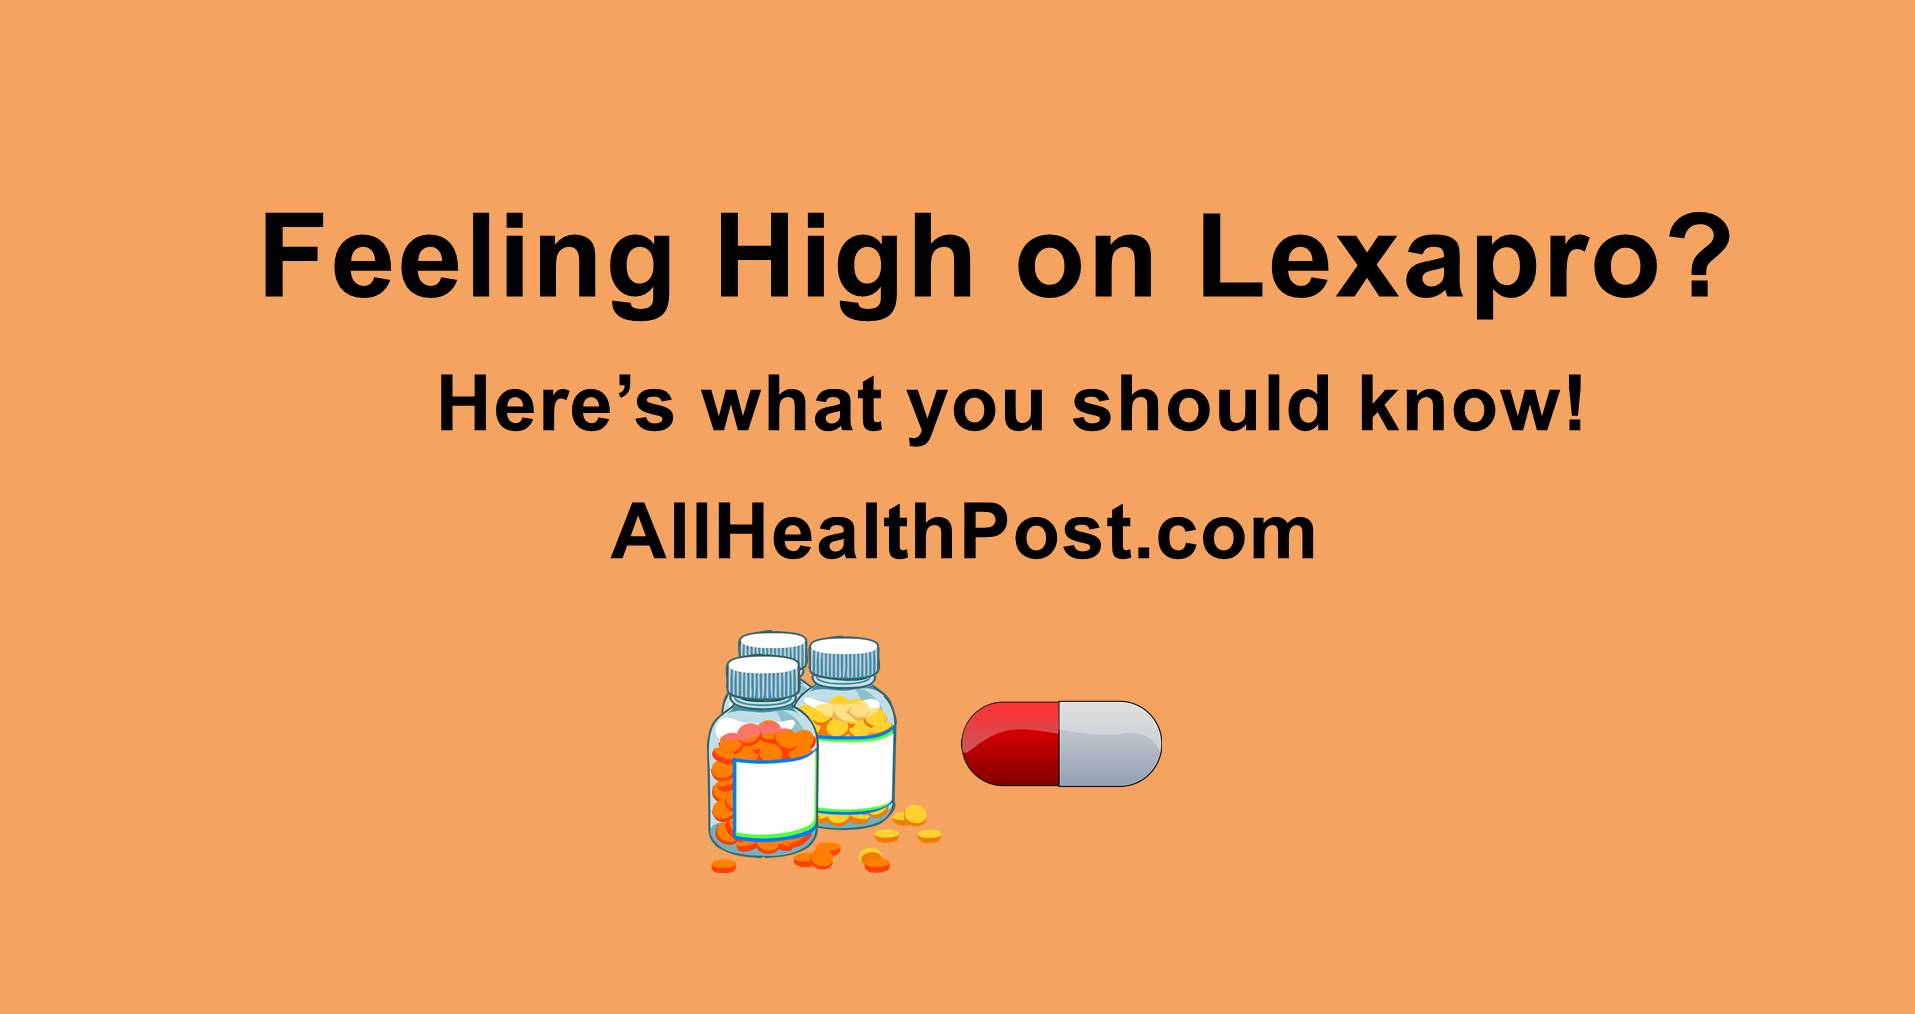 Introduction/What is Lexapro? Prescribed dosage of Lexapro Side-effects of Lexapro Lexapro overdose, high doses of Lexapro Lexapro addiction Why does Lexapro cause addiction? Signs of Lexapro addiction Lexapro withdrawal and its symptoms Treatment for Lexapro addiction Warnings and precautions Conclusion